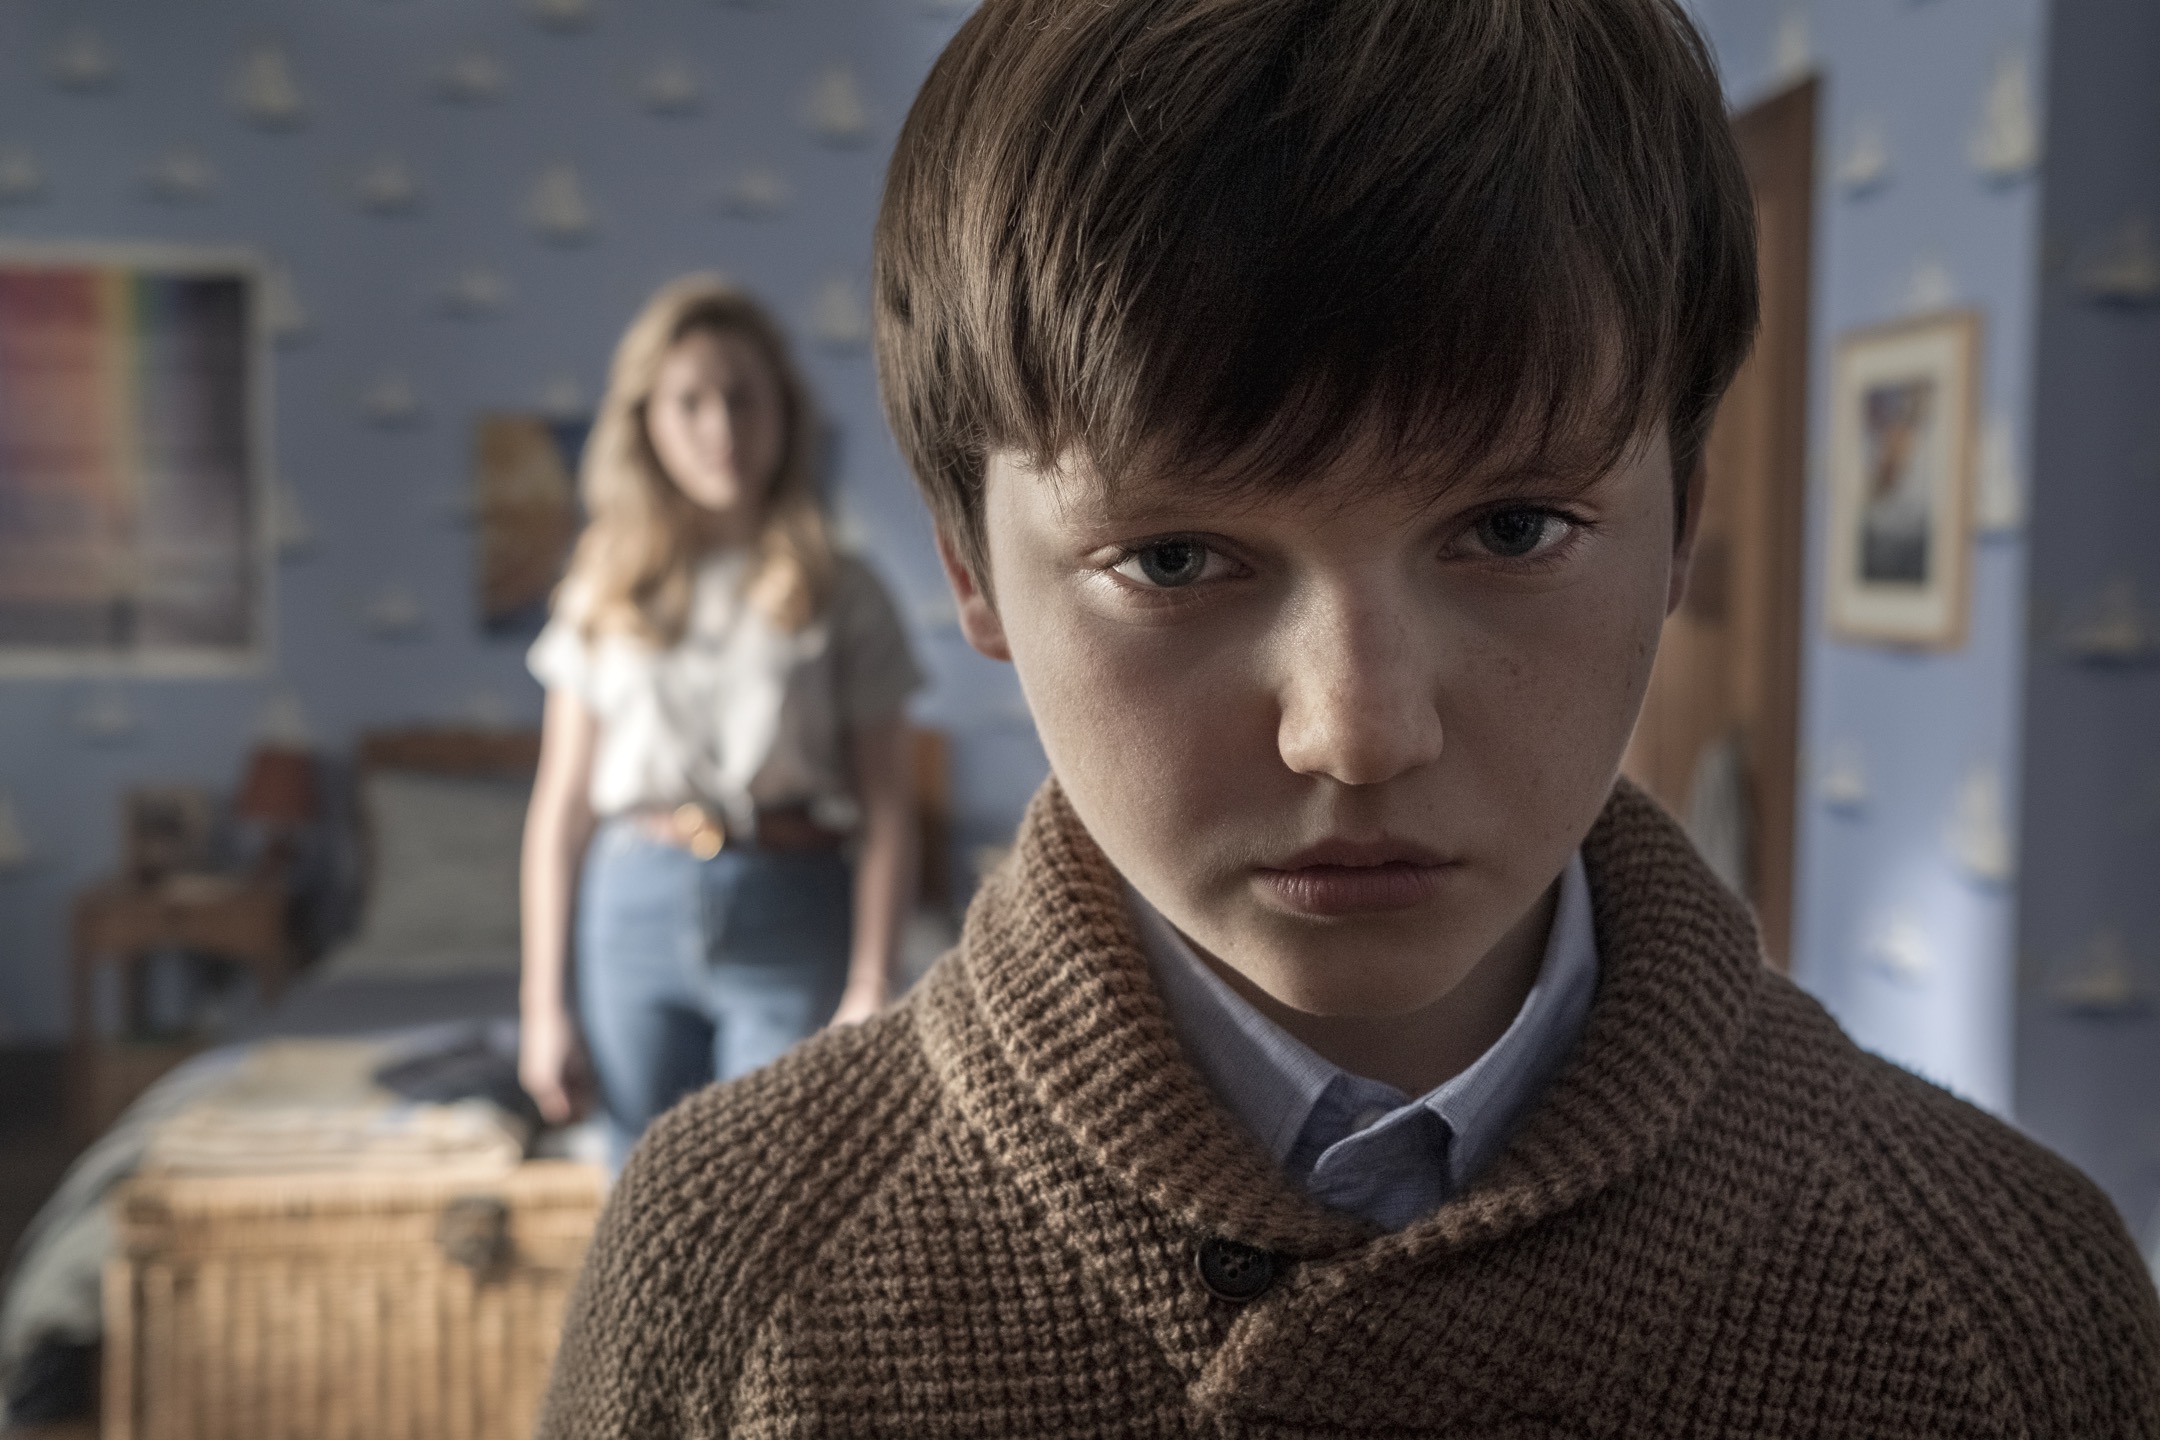 THE HAUNTING OF BLY MANOR (L to R) VICTORIA PEDRETTI as DANI and BENJAMIN EVAN AINSWORTH as MILES in episode, 203 of THE HAUNTING OF BLY MANOR. Cr. EIKE SCHROTER/NETFLIX © 2020